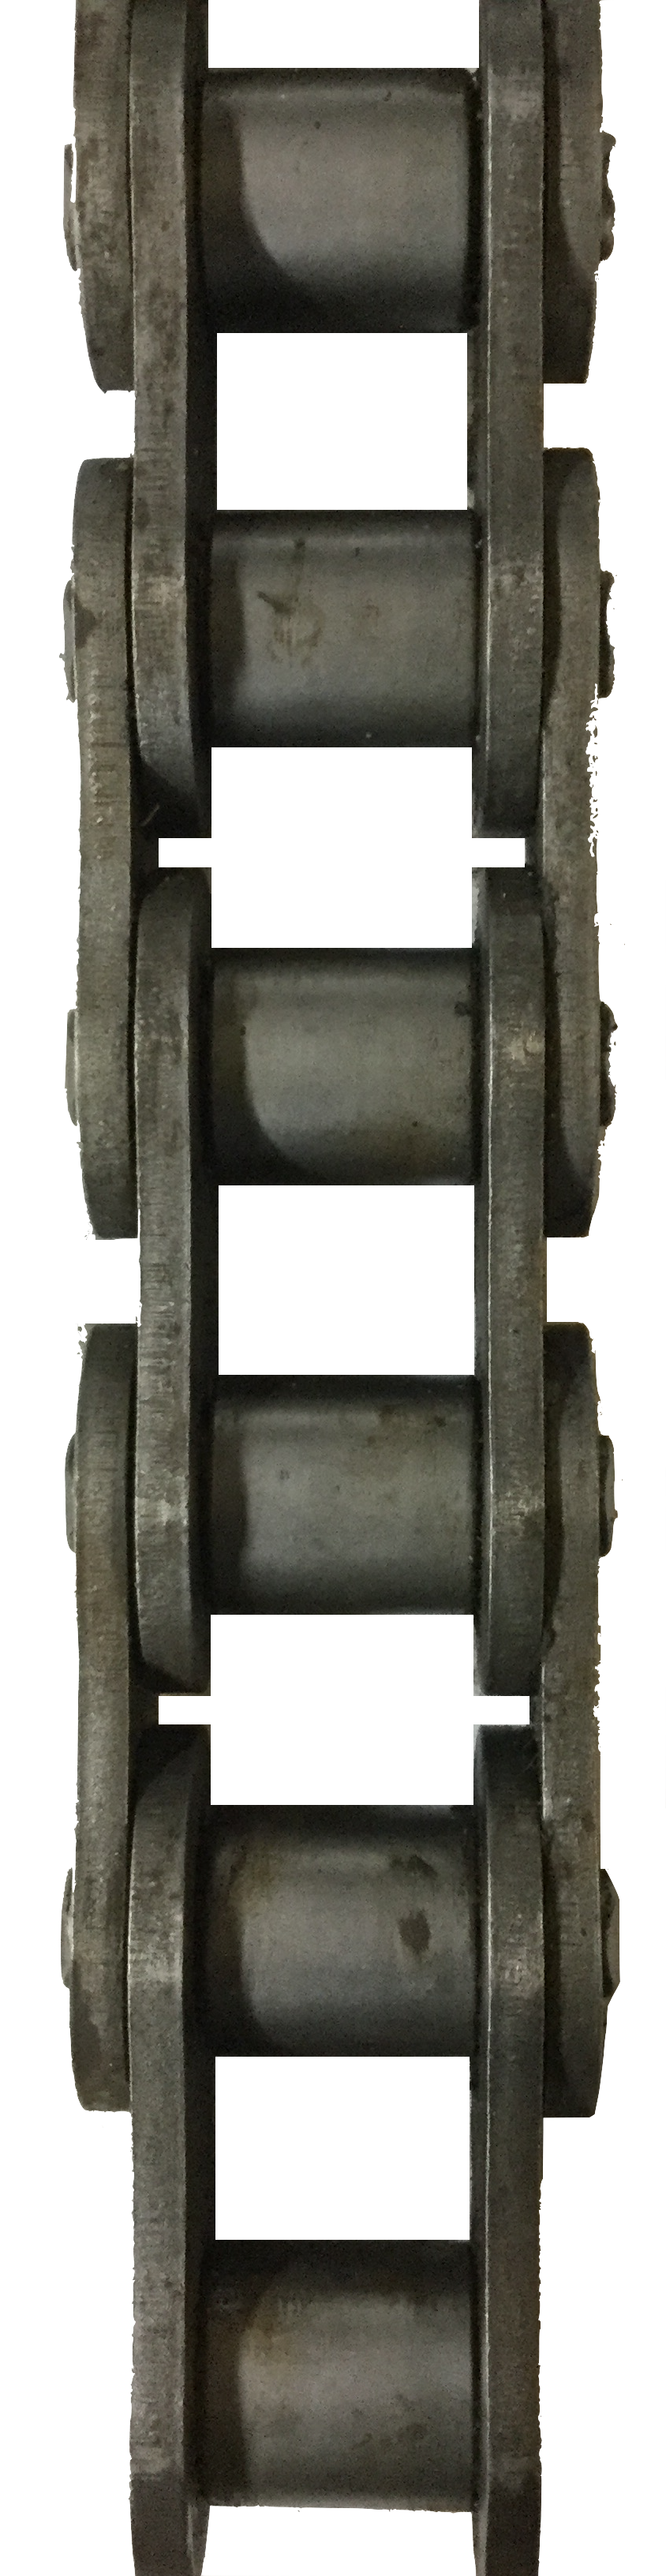 HKK #160 Standard Riveted Roller Chain (2.000" Pitch) - SOLD BY THE FOOT - Froedge Machine & Supply Co., Inc.